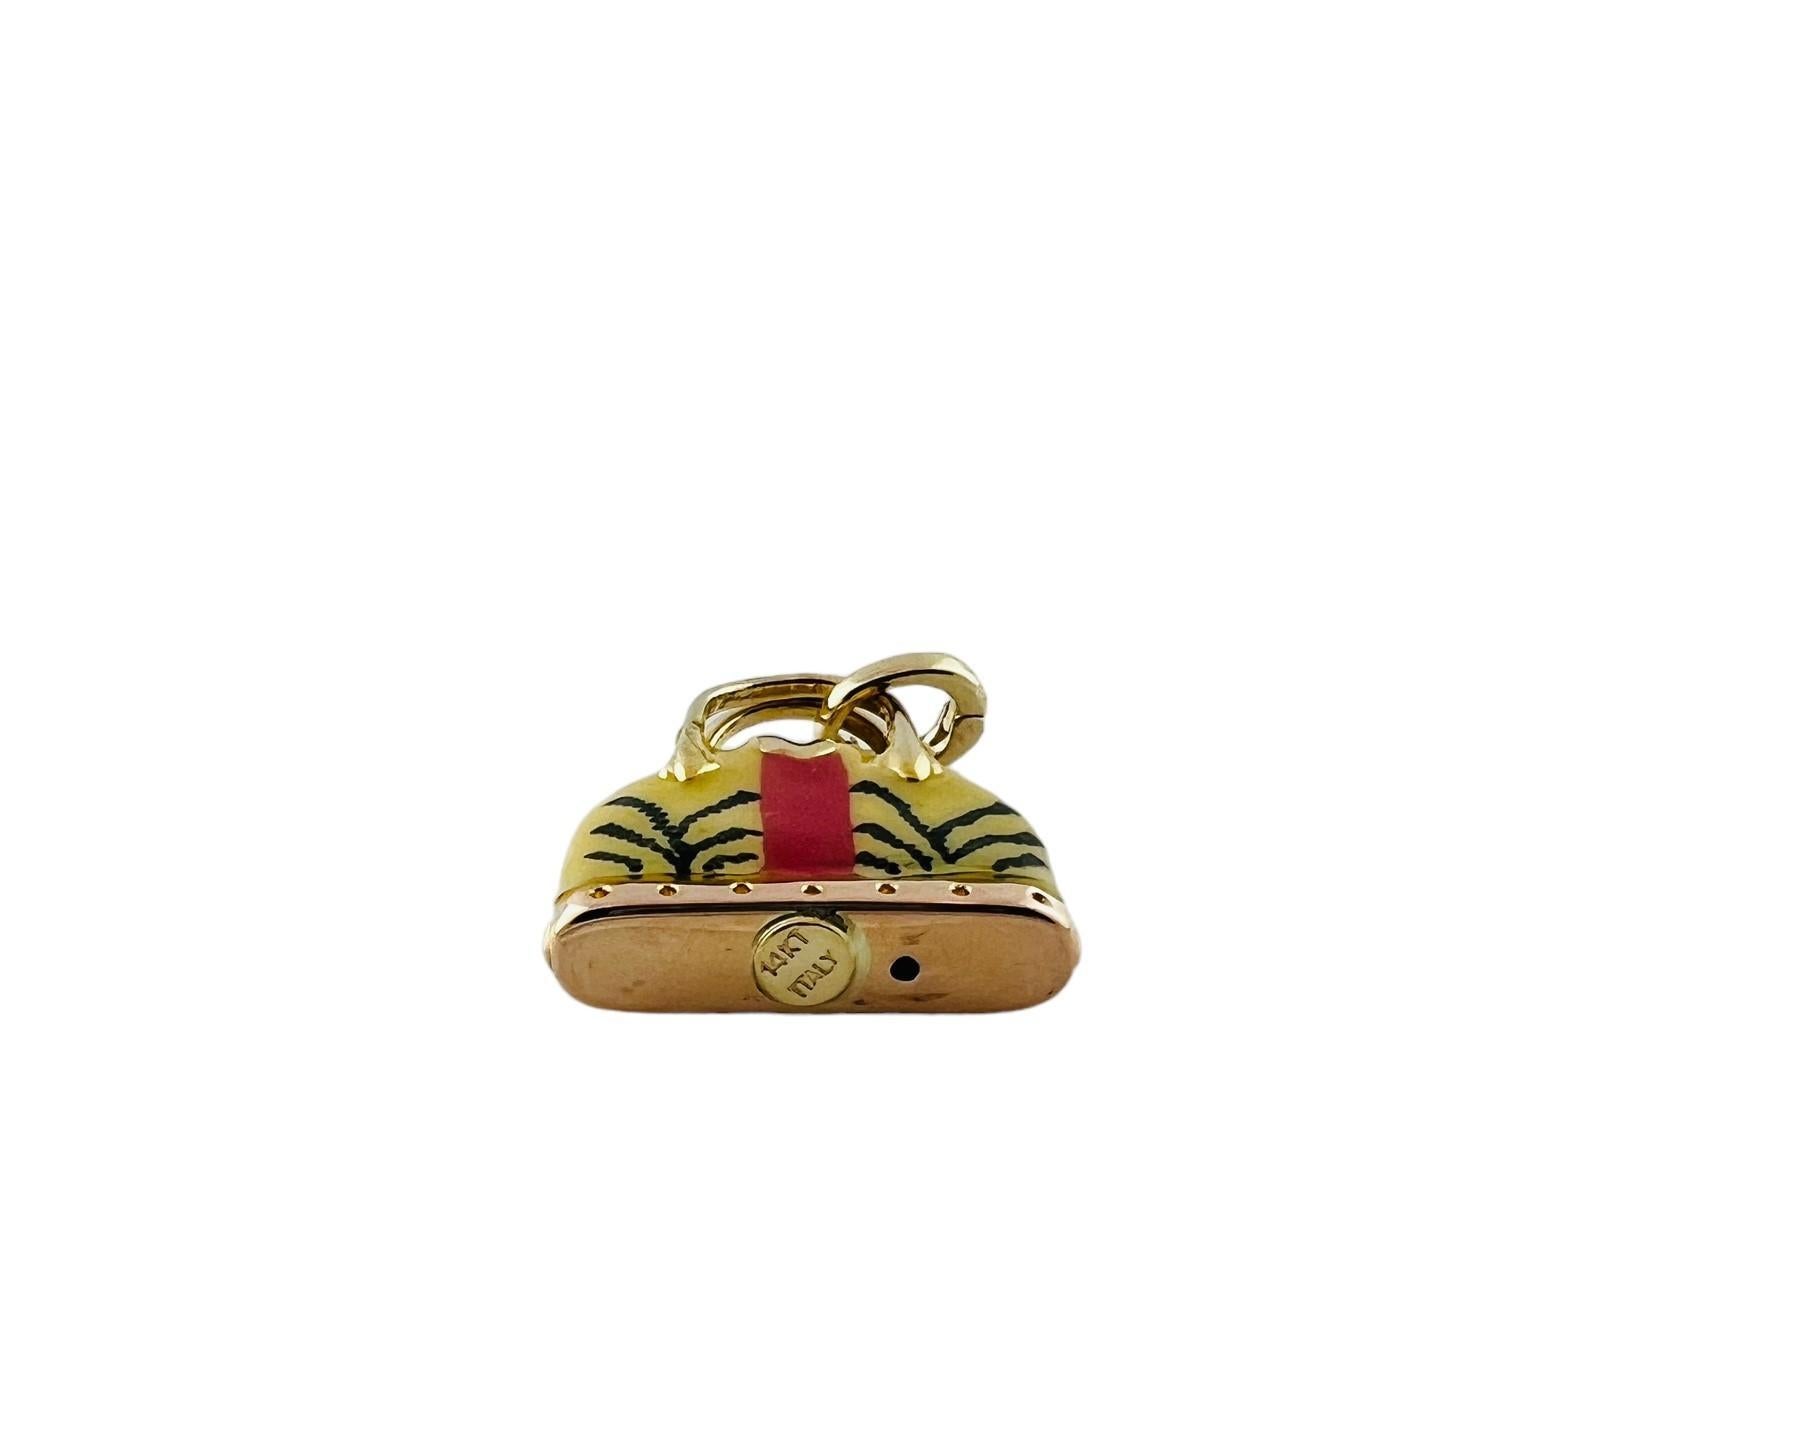 14K Yellow Gold Enamel Purse Charm #15559 In Good Condition For Sale In Washington Depot, CT